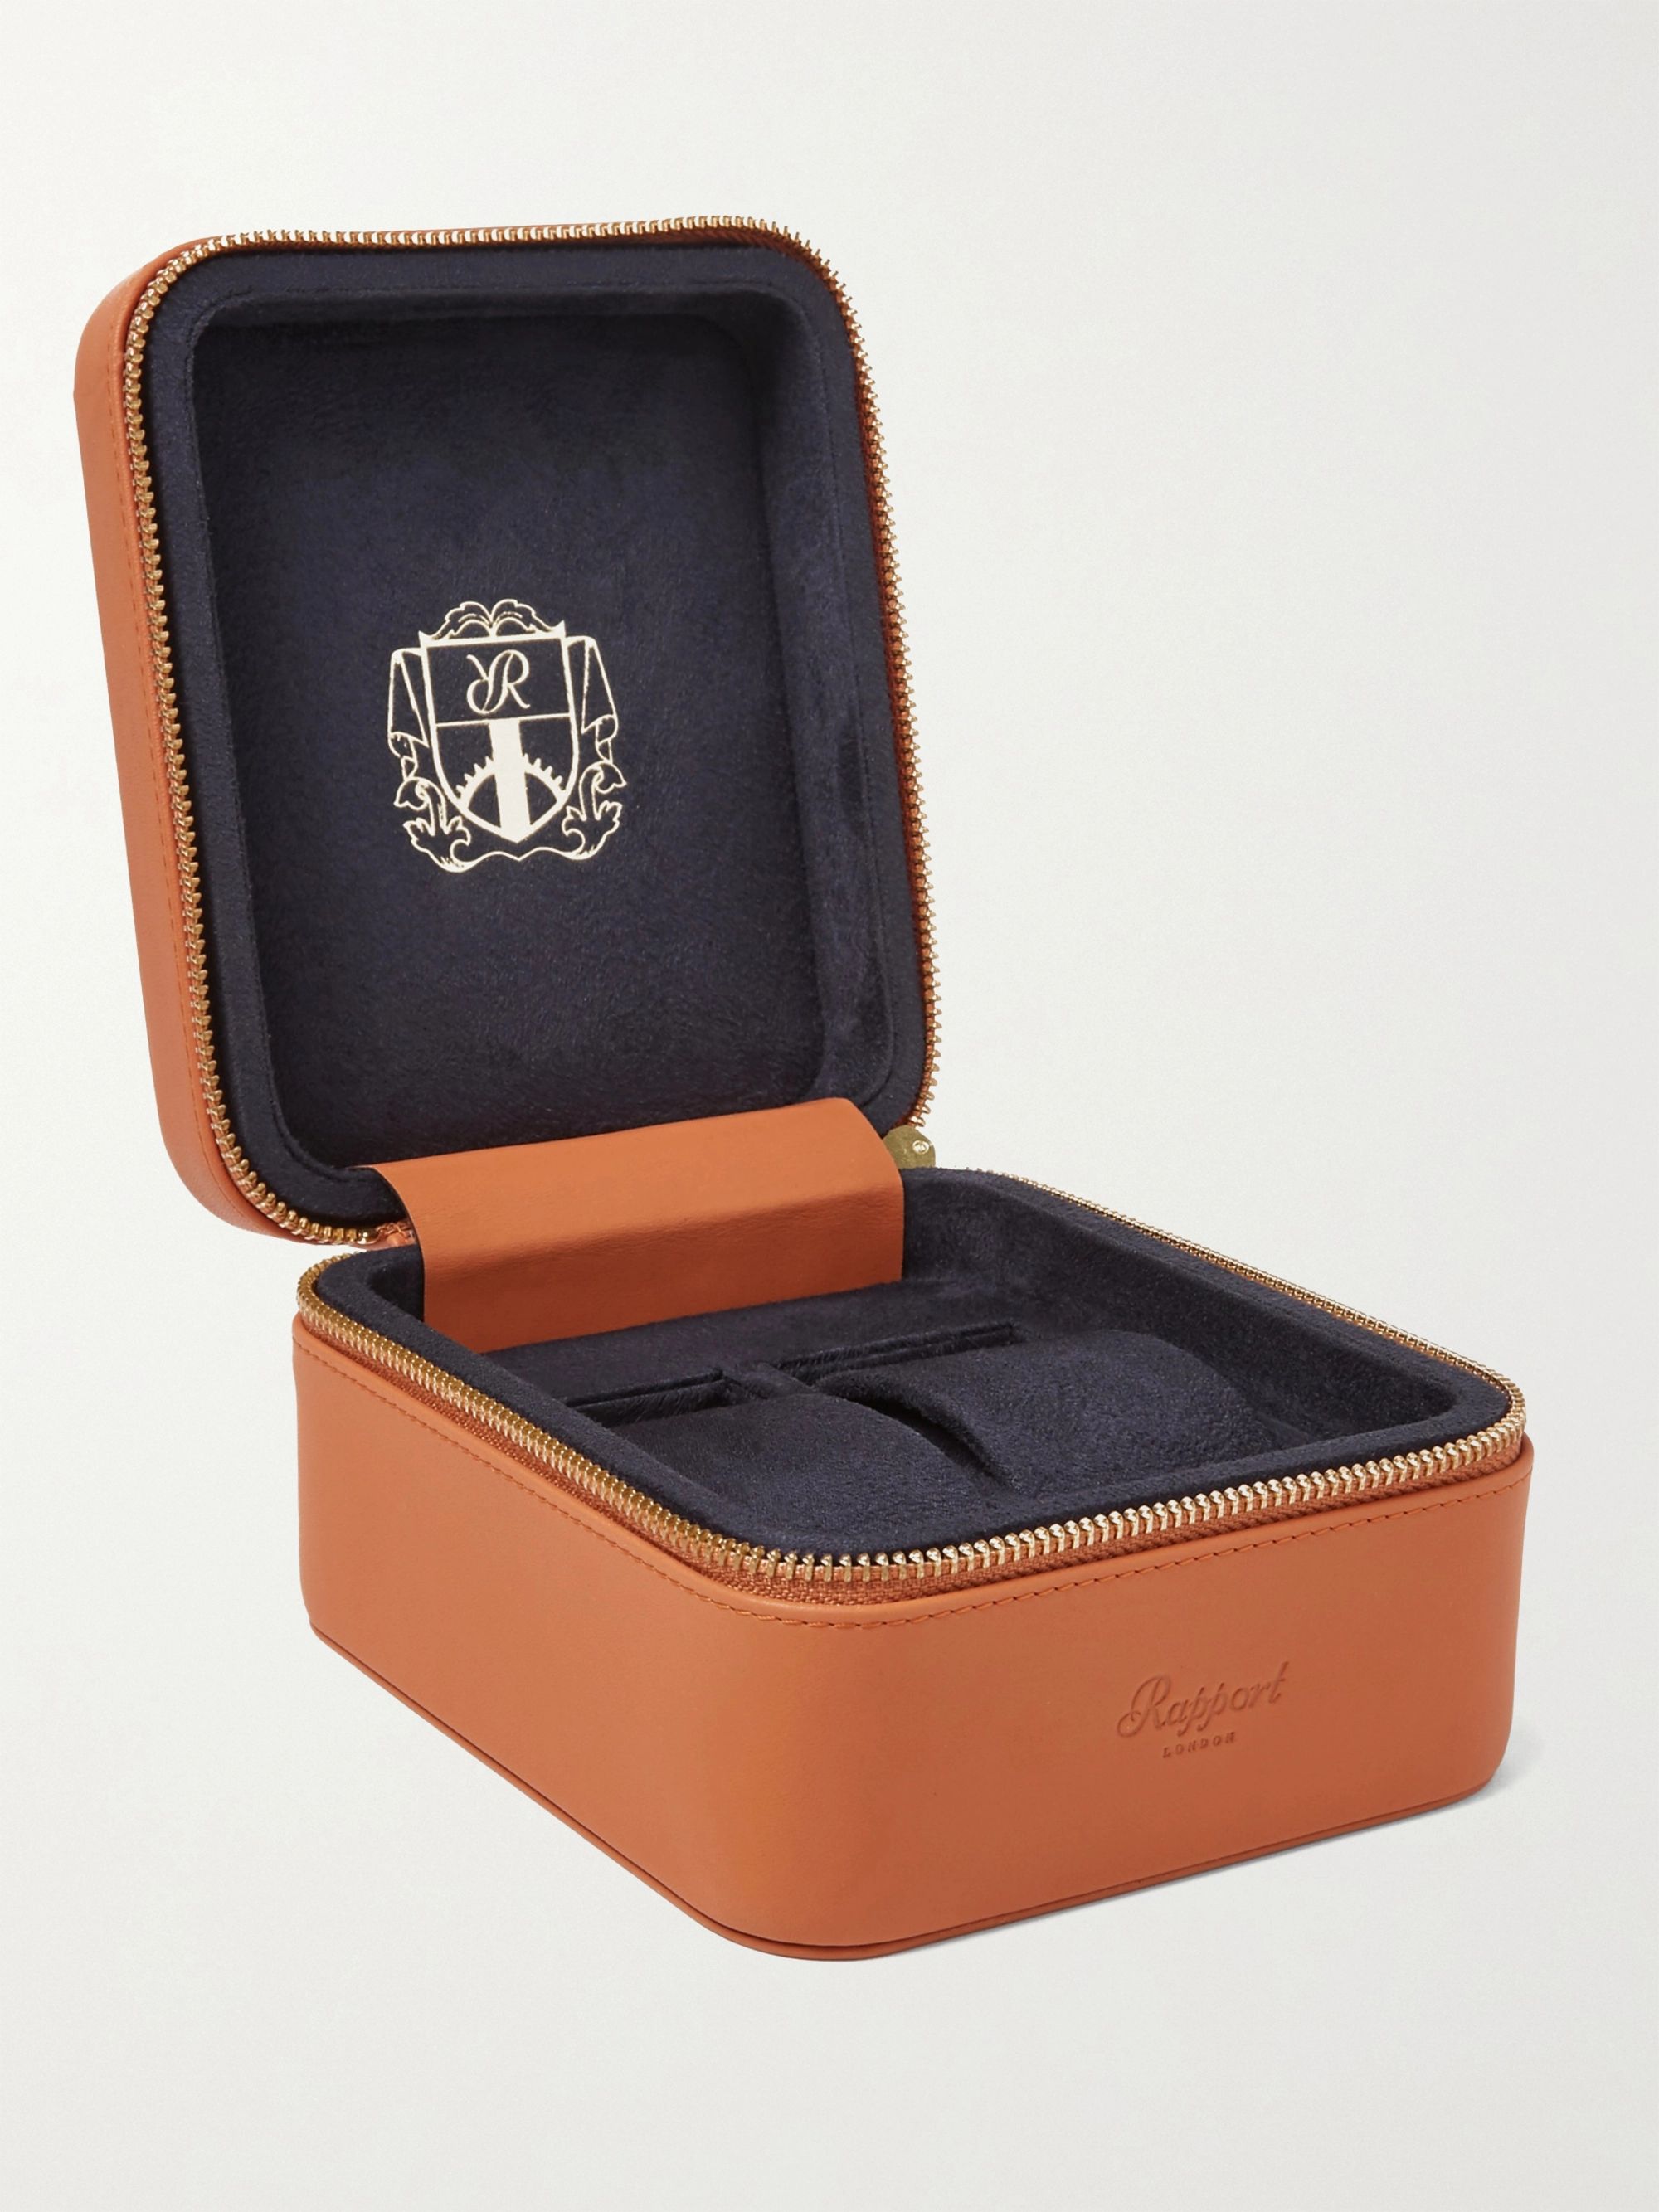 RAPPORT LONDON Hyde Park Zip-Around Leather Watch Box